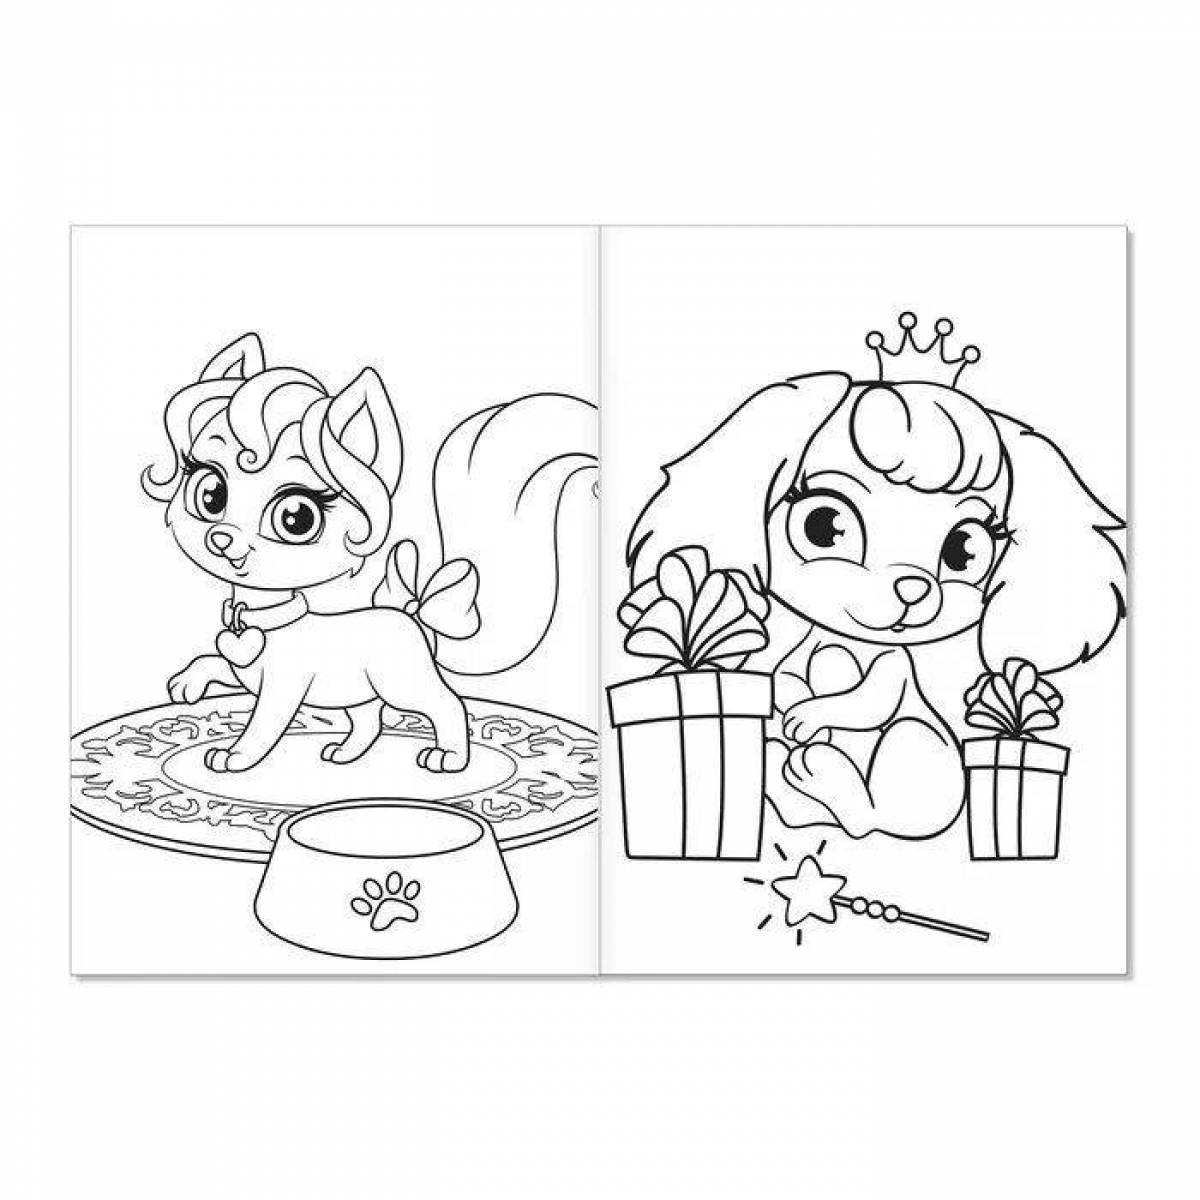 Joyful and precious pet coloring pages